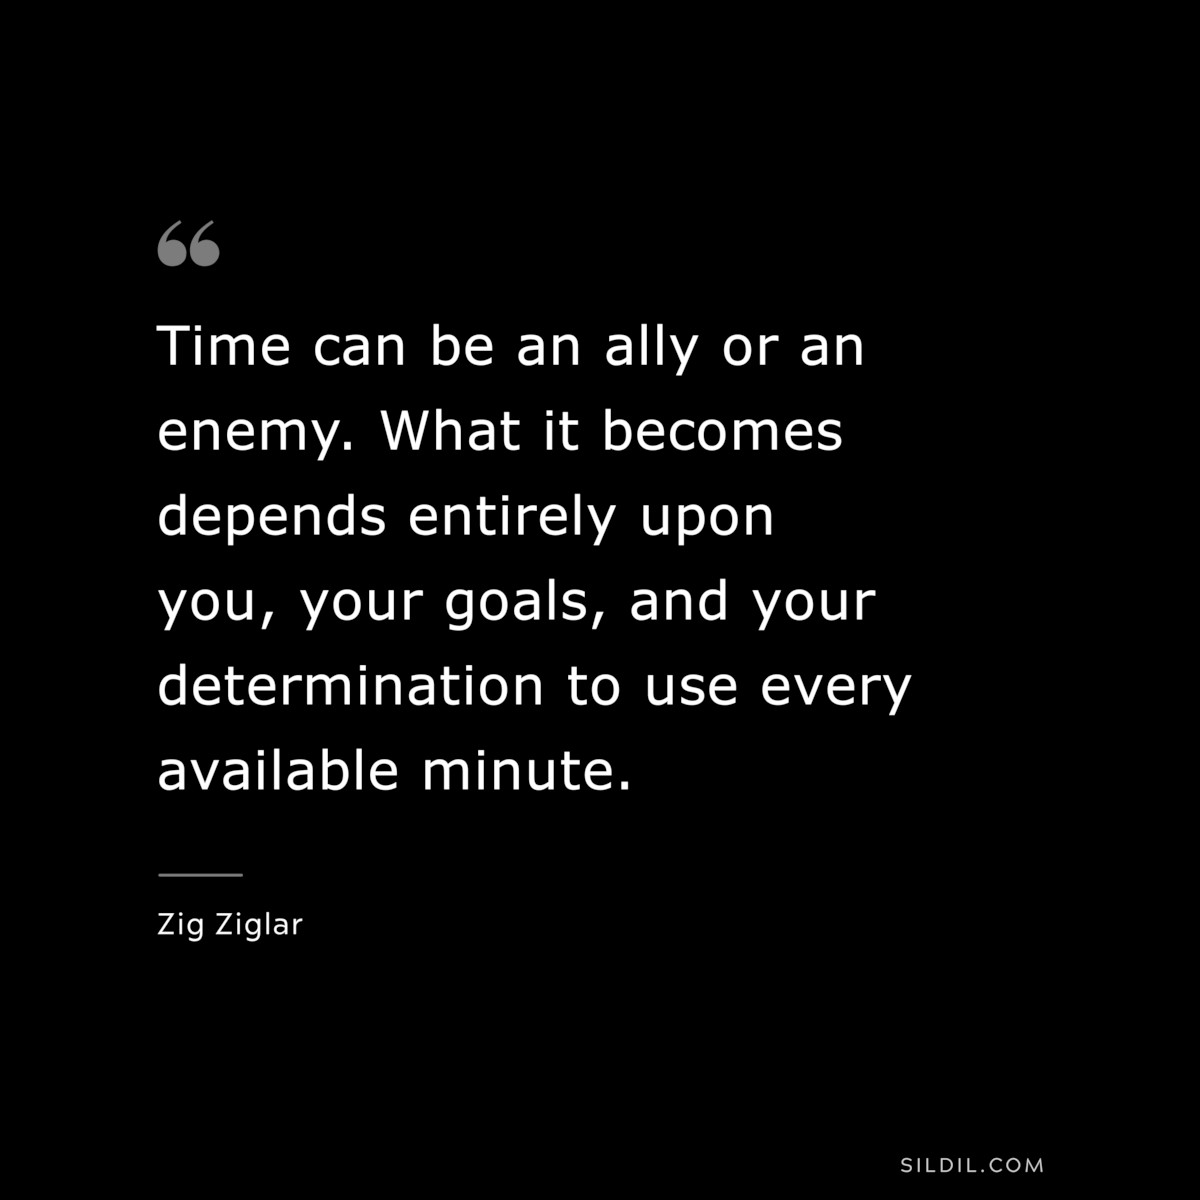 Time can be an ally or an enemy. What it becomes depends entirely upon you, your goals, and your determination to use every available minute. ― Zig Ziglar